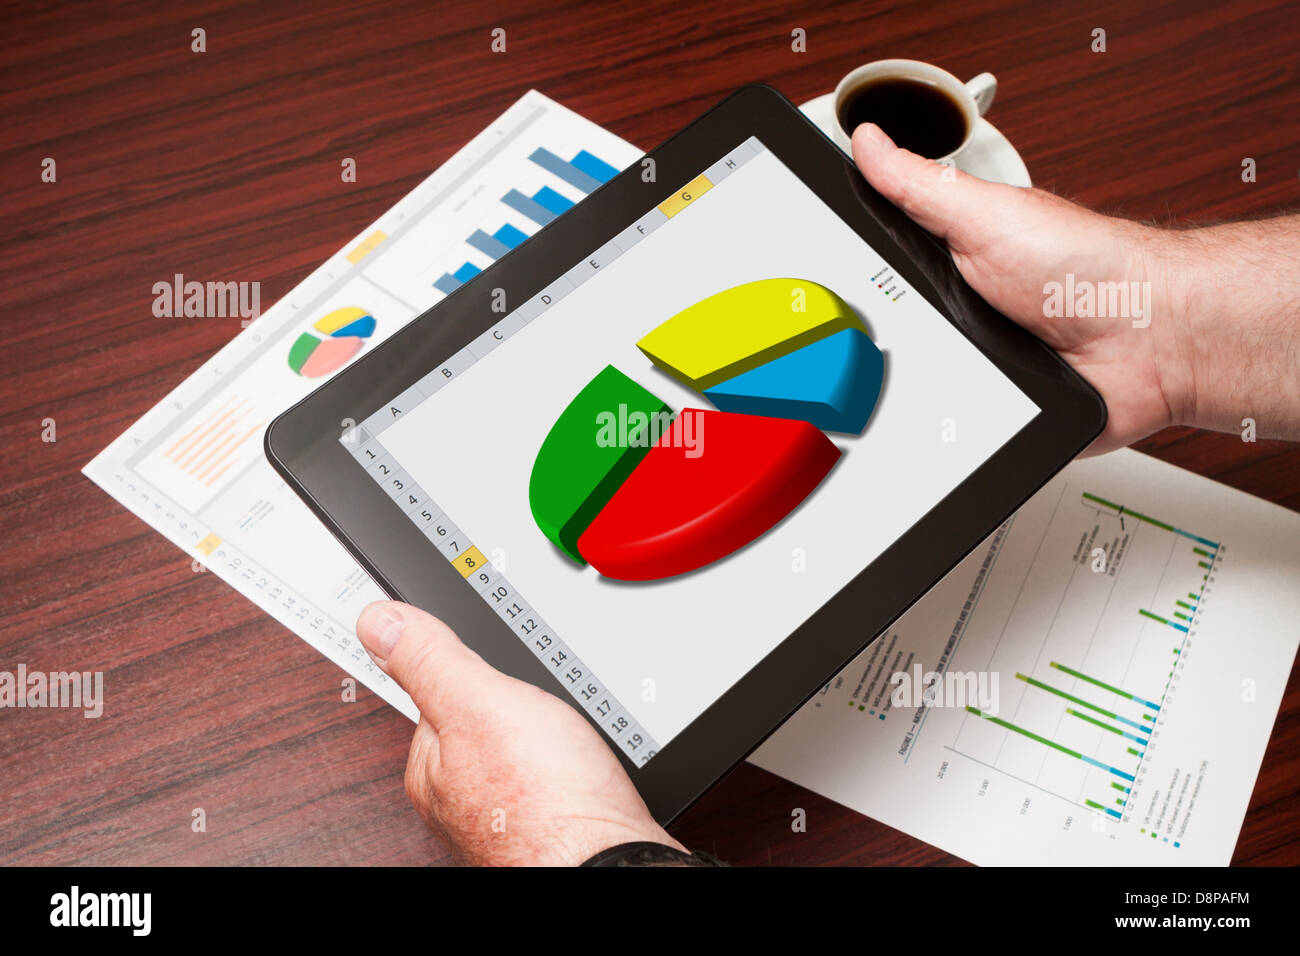 Modern workplace with digital tablet showing charts and diagram on screen Stock Photo